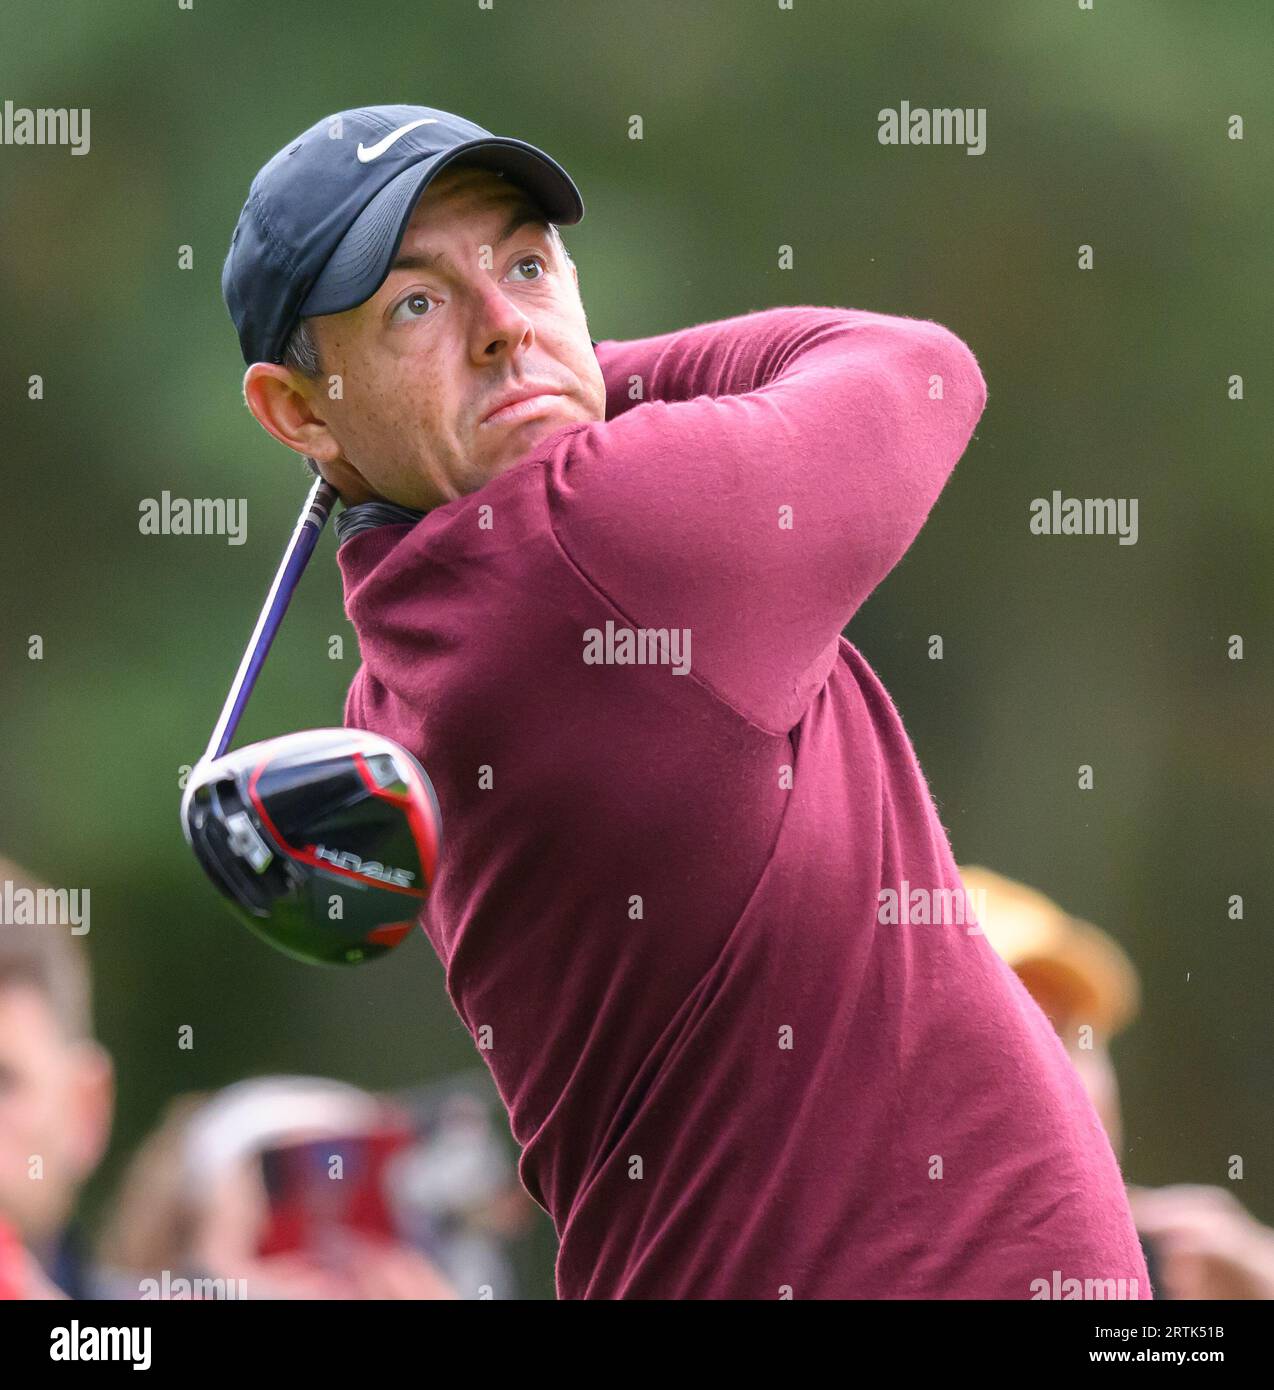 BMW PGA Championship - Wentworth, UK. 13th Sep, 2023.     Rory McIlroy plays during the Pro-Am competition at the BMW PGA Championship. Picture Credit: Mark Pain/Alamy Live News Stock Photo